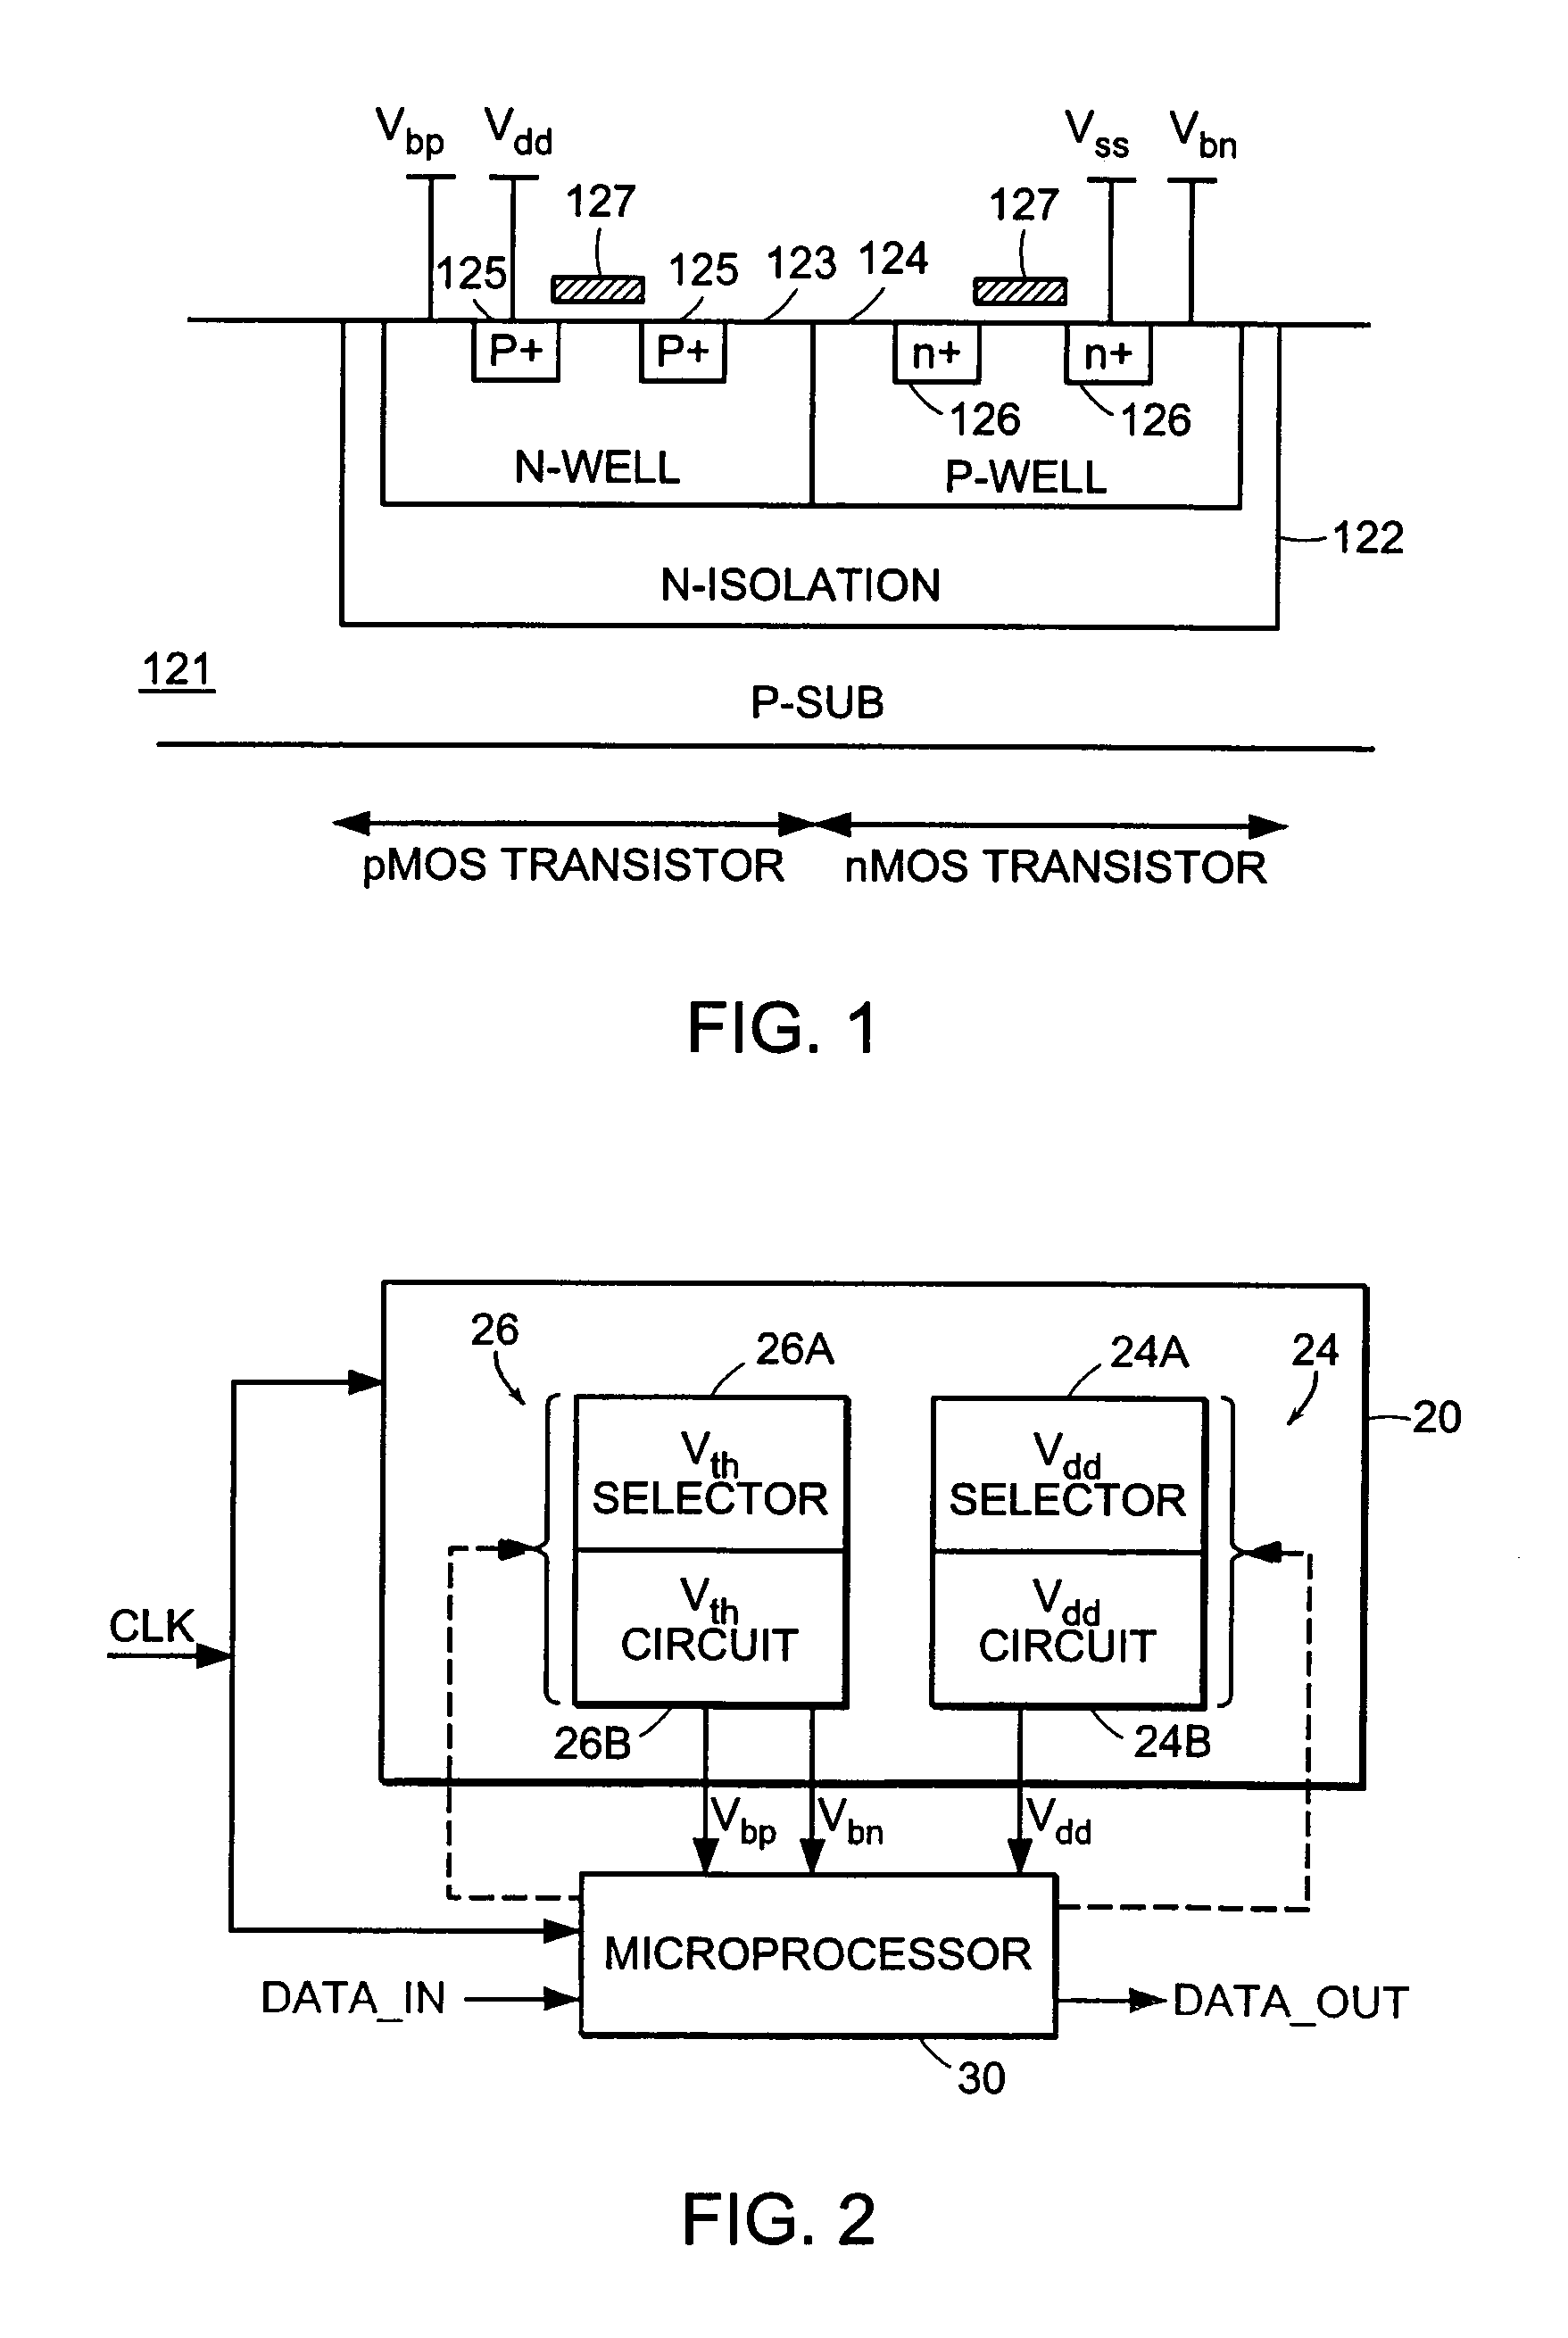 Adaptive power supply and substrate control for ultra low power digital processors using triple well control